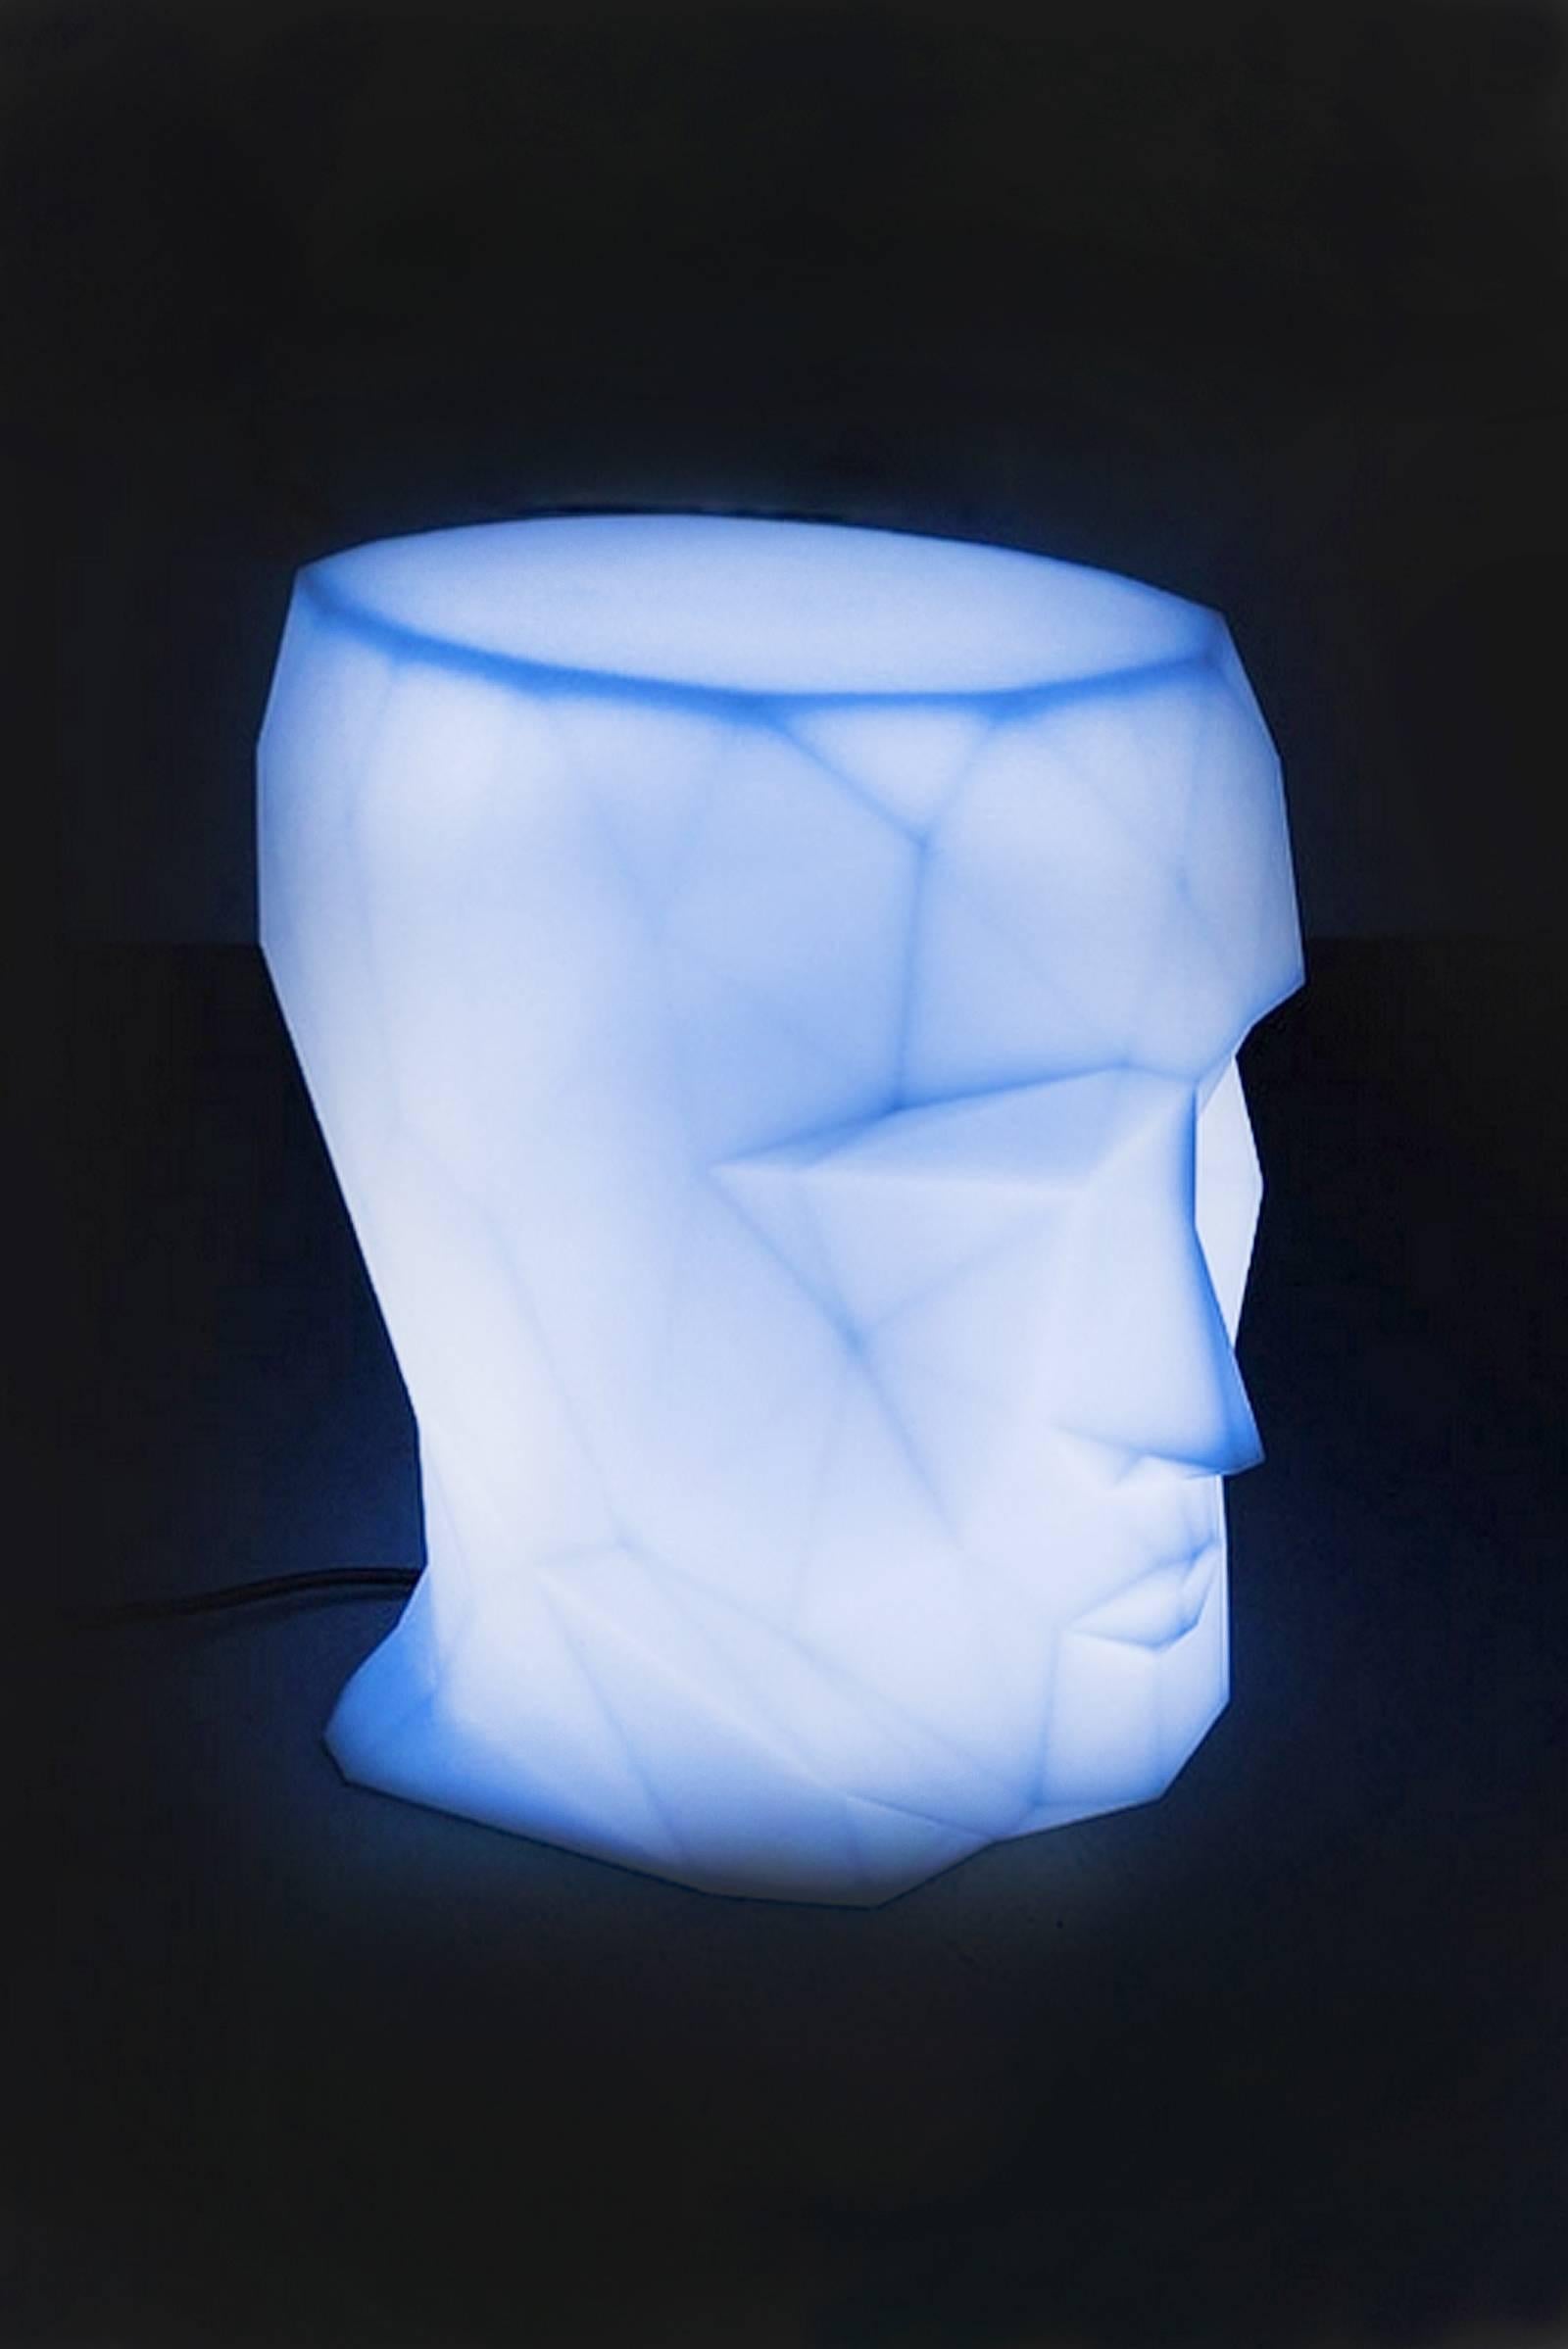 Side table or stool in white polyethylene resin. Led light head,
automatic color change lighting or by remote control. With
battery sytem, no plug. Seven lighting
colors: blue, light blue, purple, green, yellow, pink and red. Indoor or
outdoor use.
